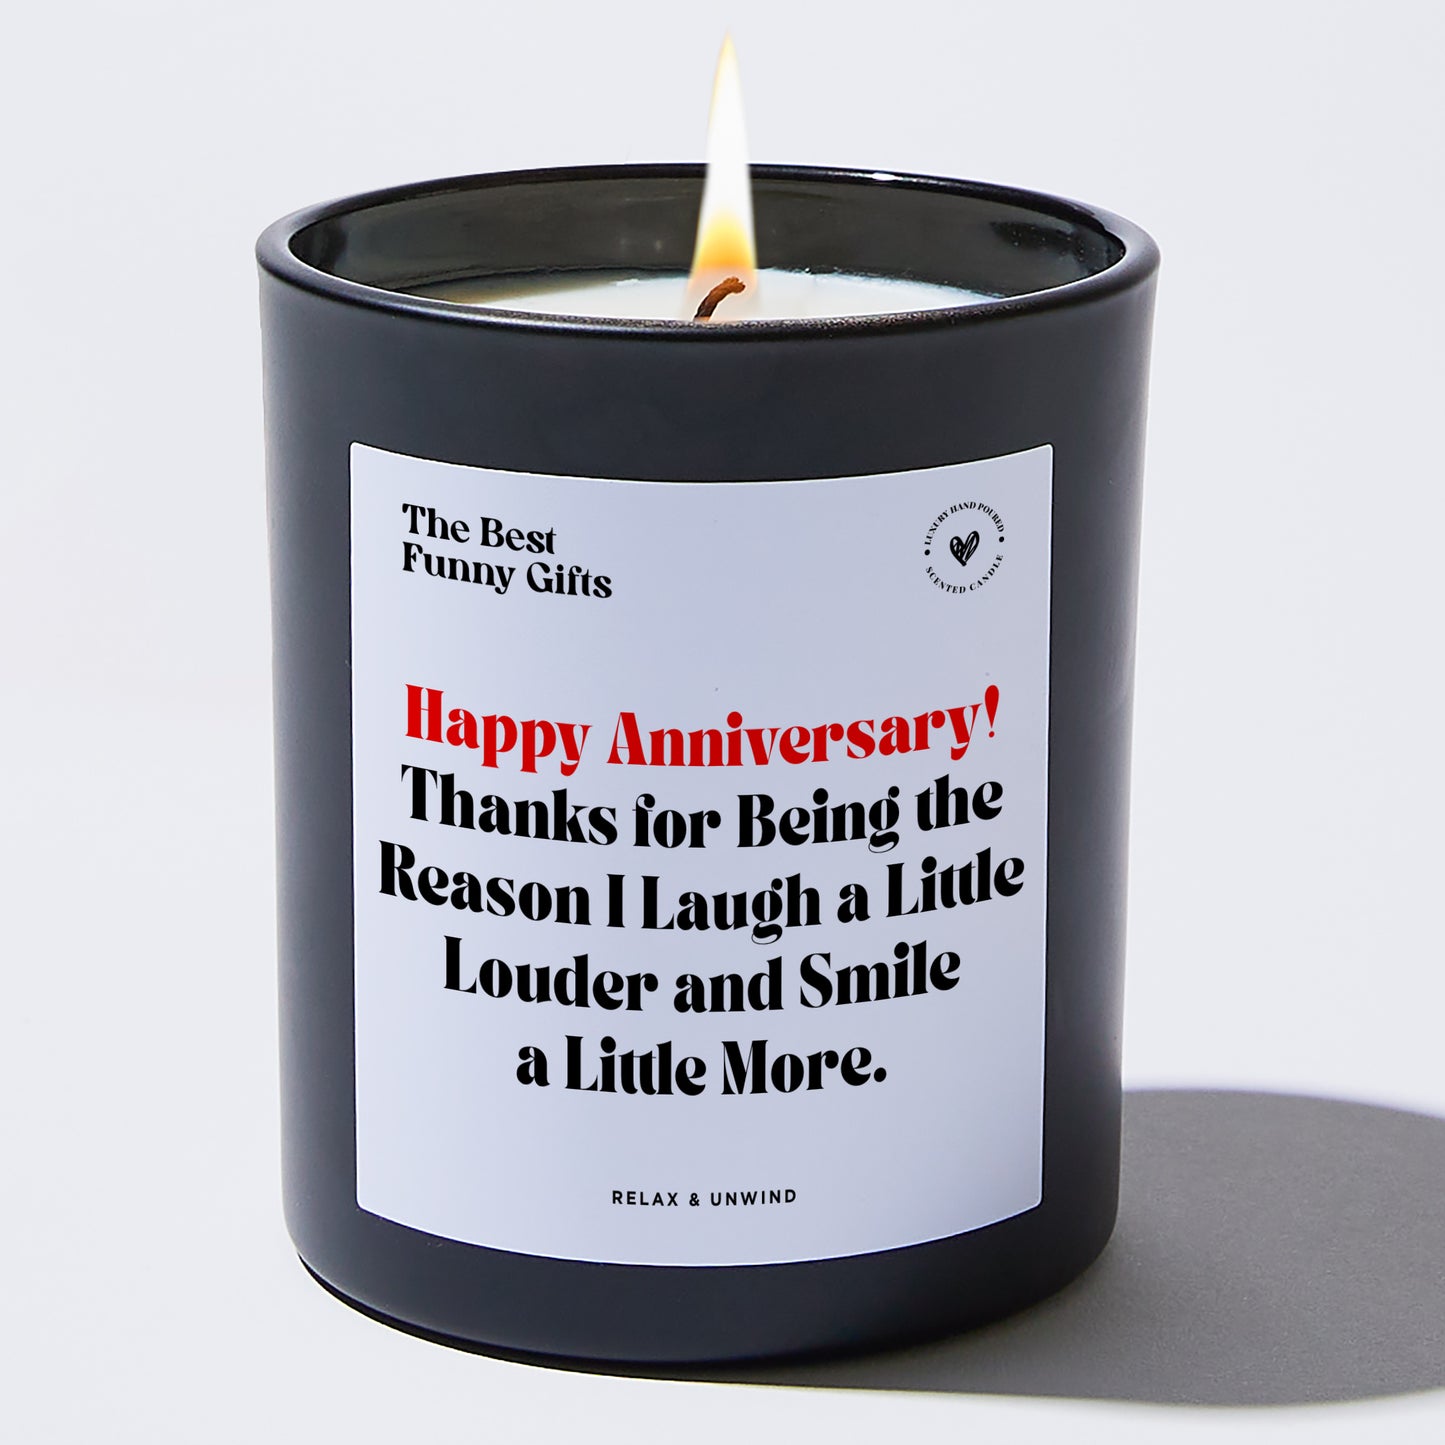 Anniversary Happy Anniversary! Thanks for Being the Reason I Laugh a Little Louder and Smile a Little More. - The Best Funny Gifts